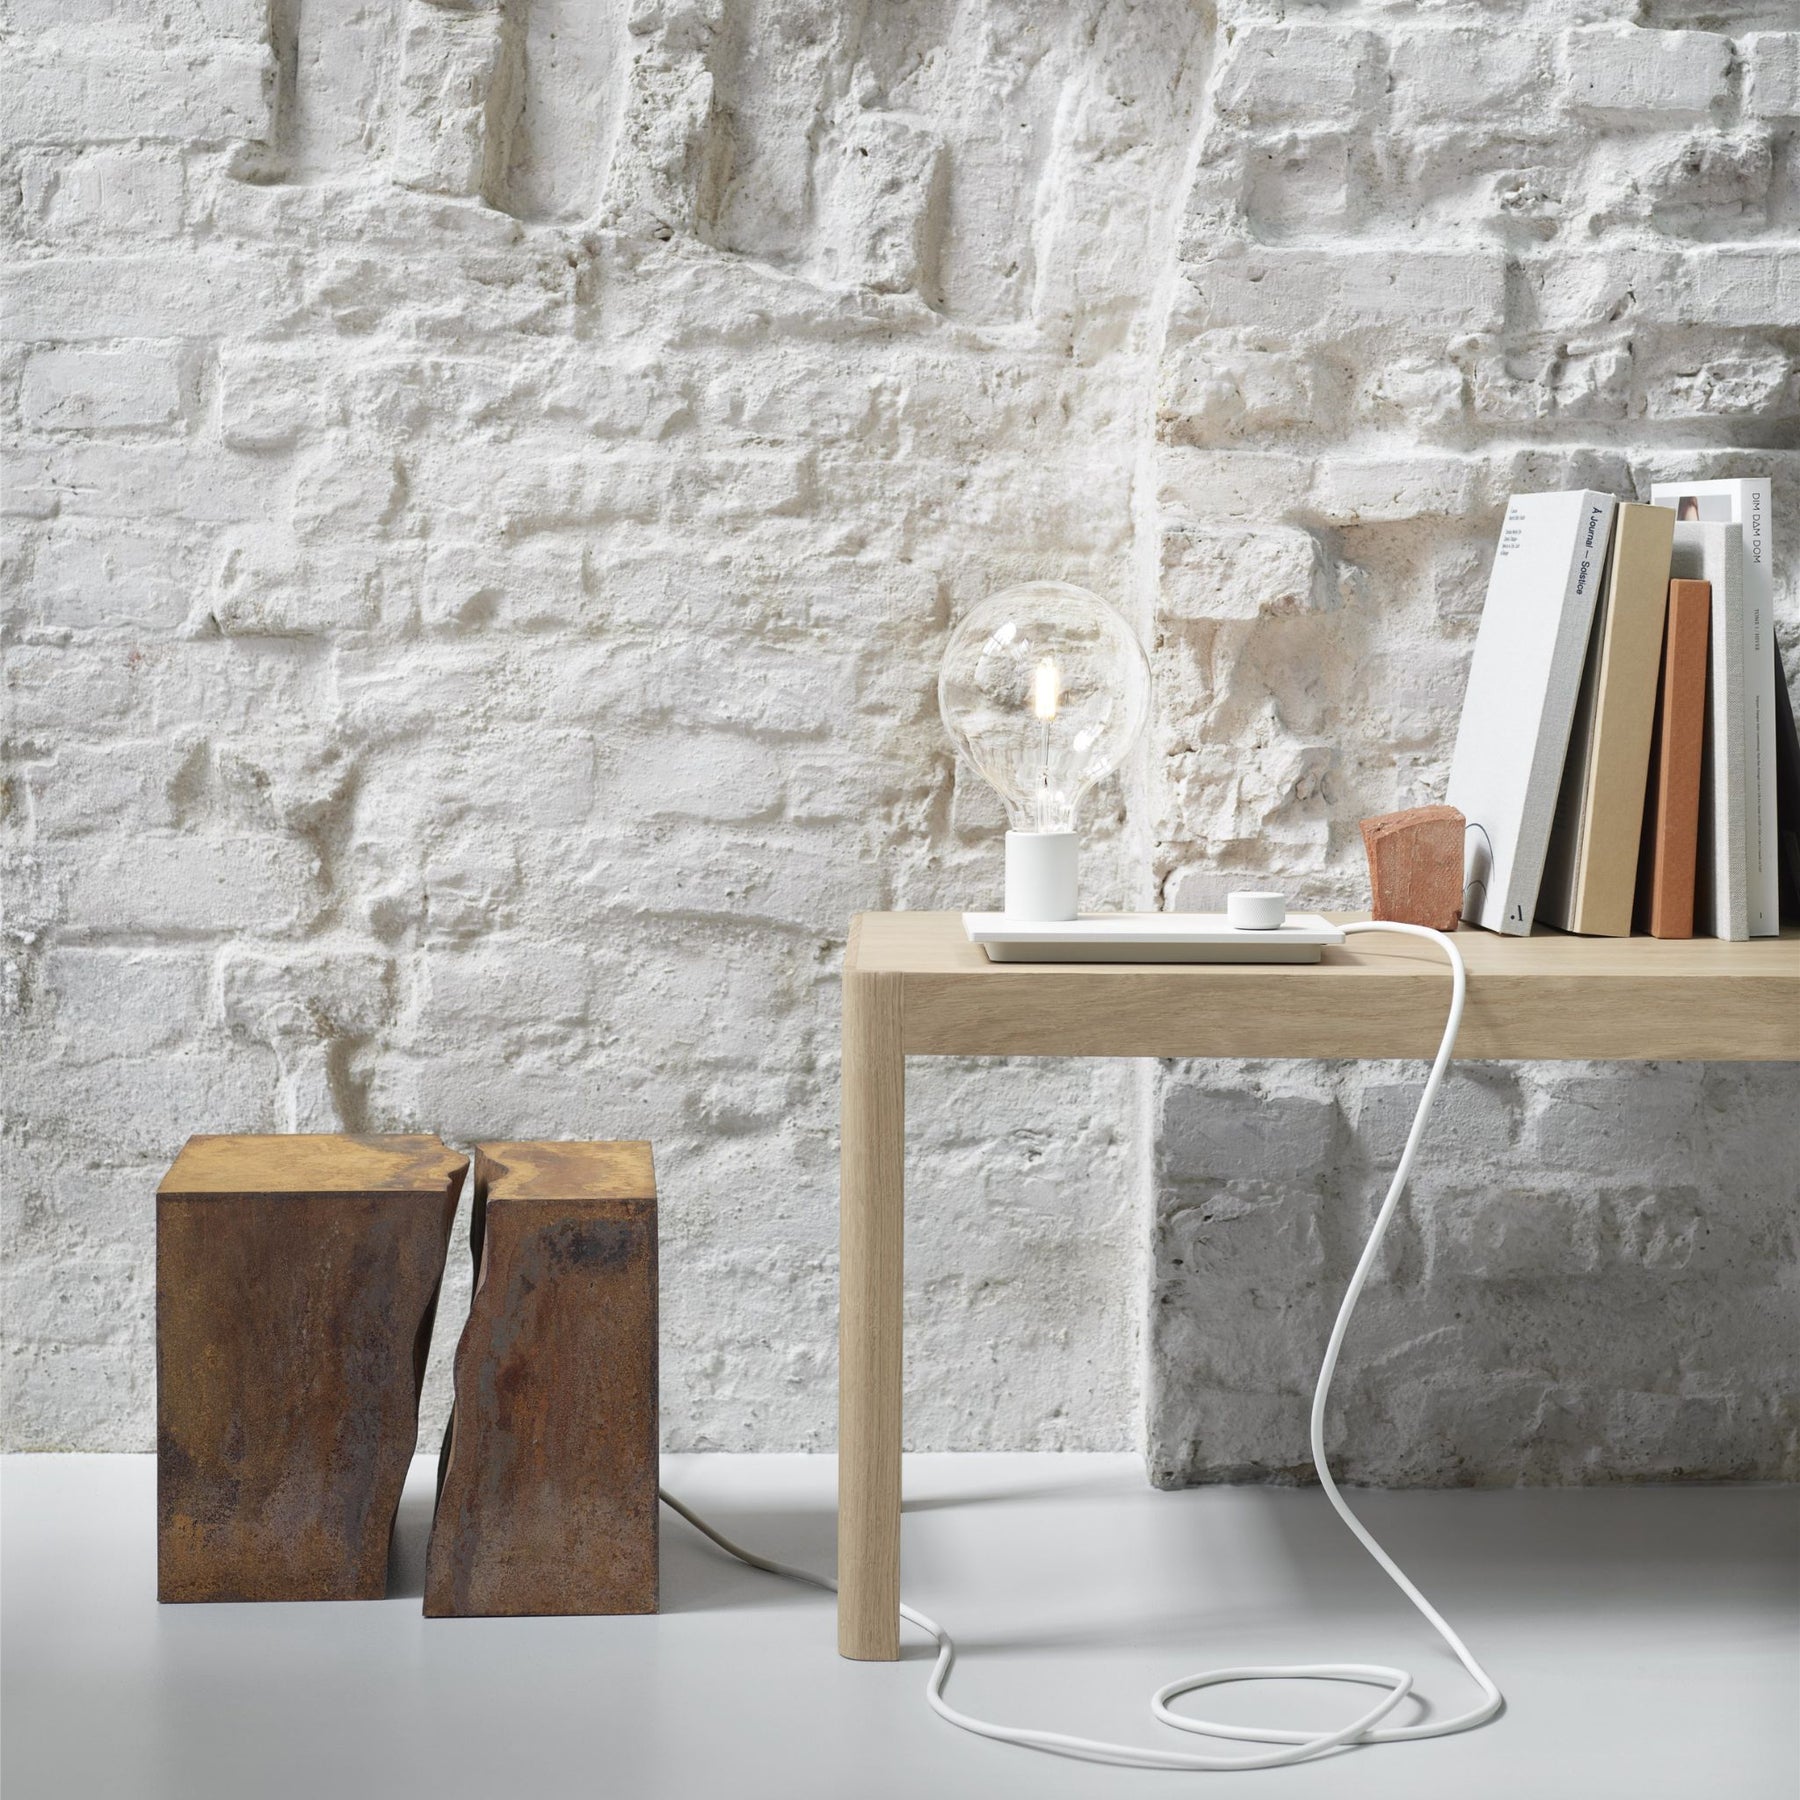 Muuto Workshop Coffee Table with Books and Control lamp